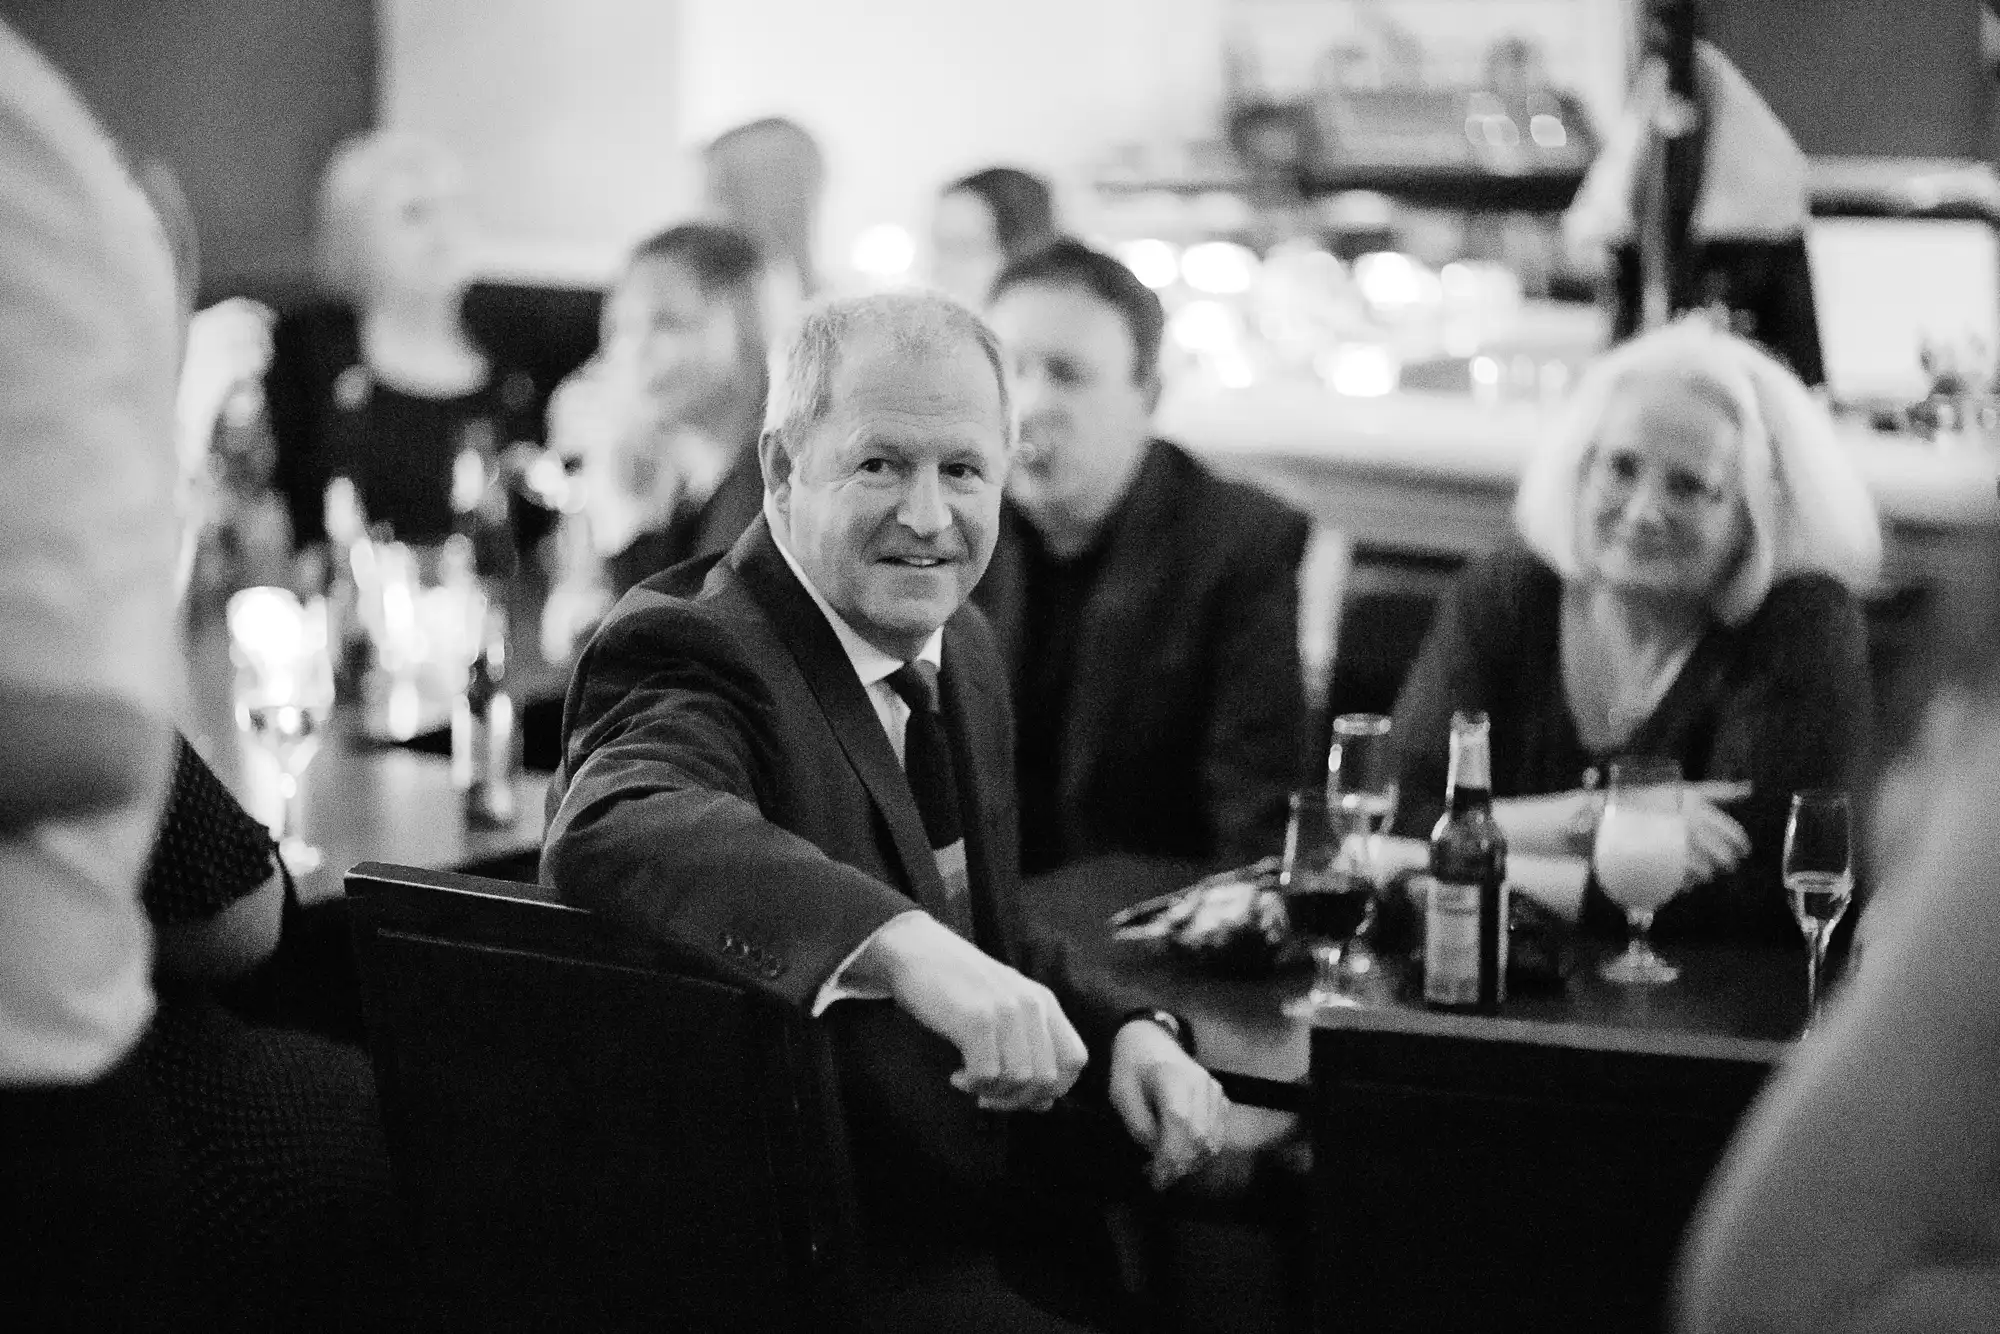 A man in a suit sitting at a bar, smiling and looking at the camera, with other people in the background.